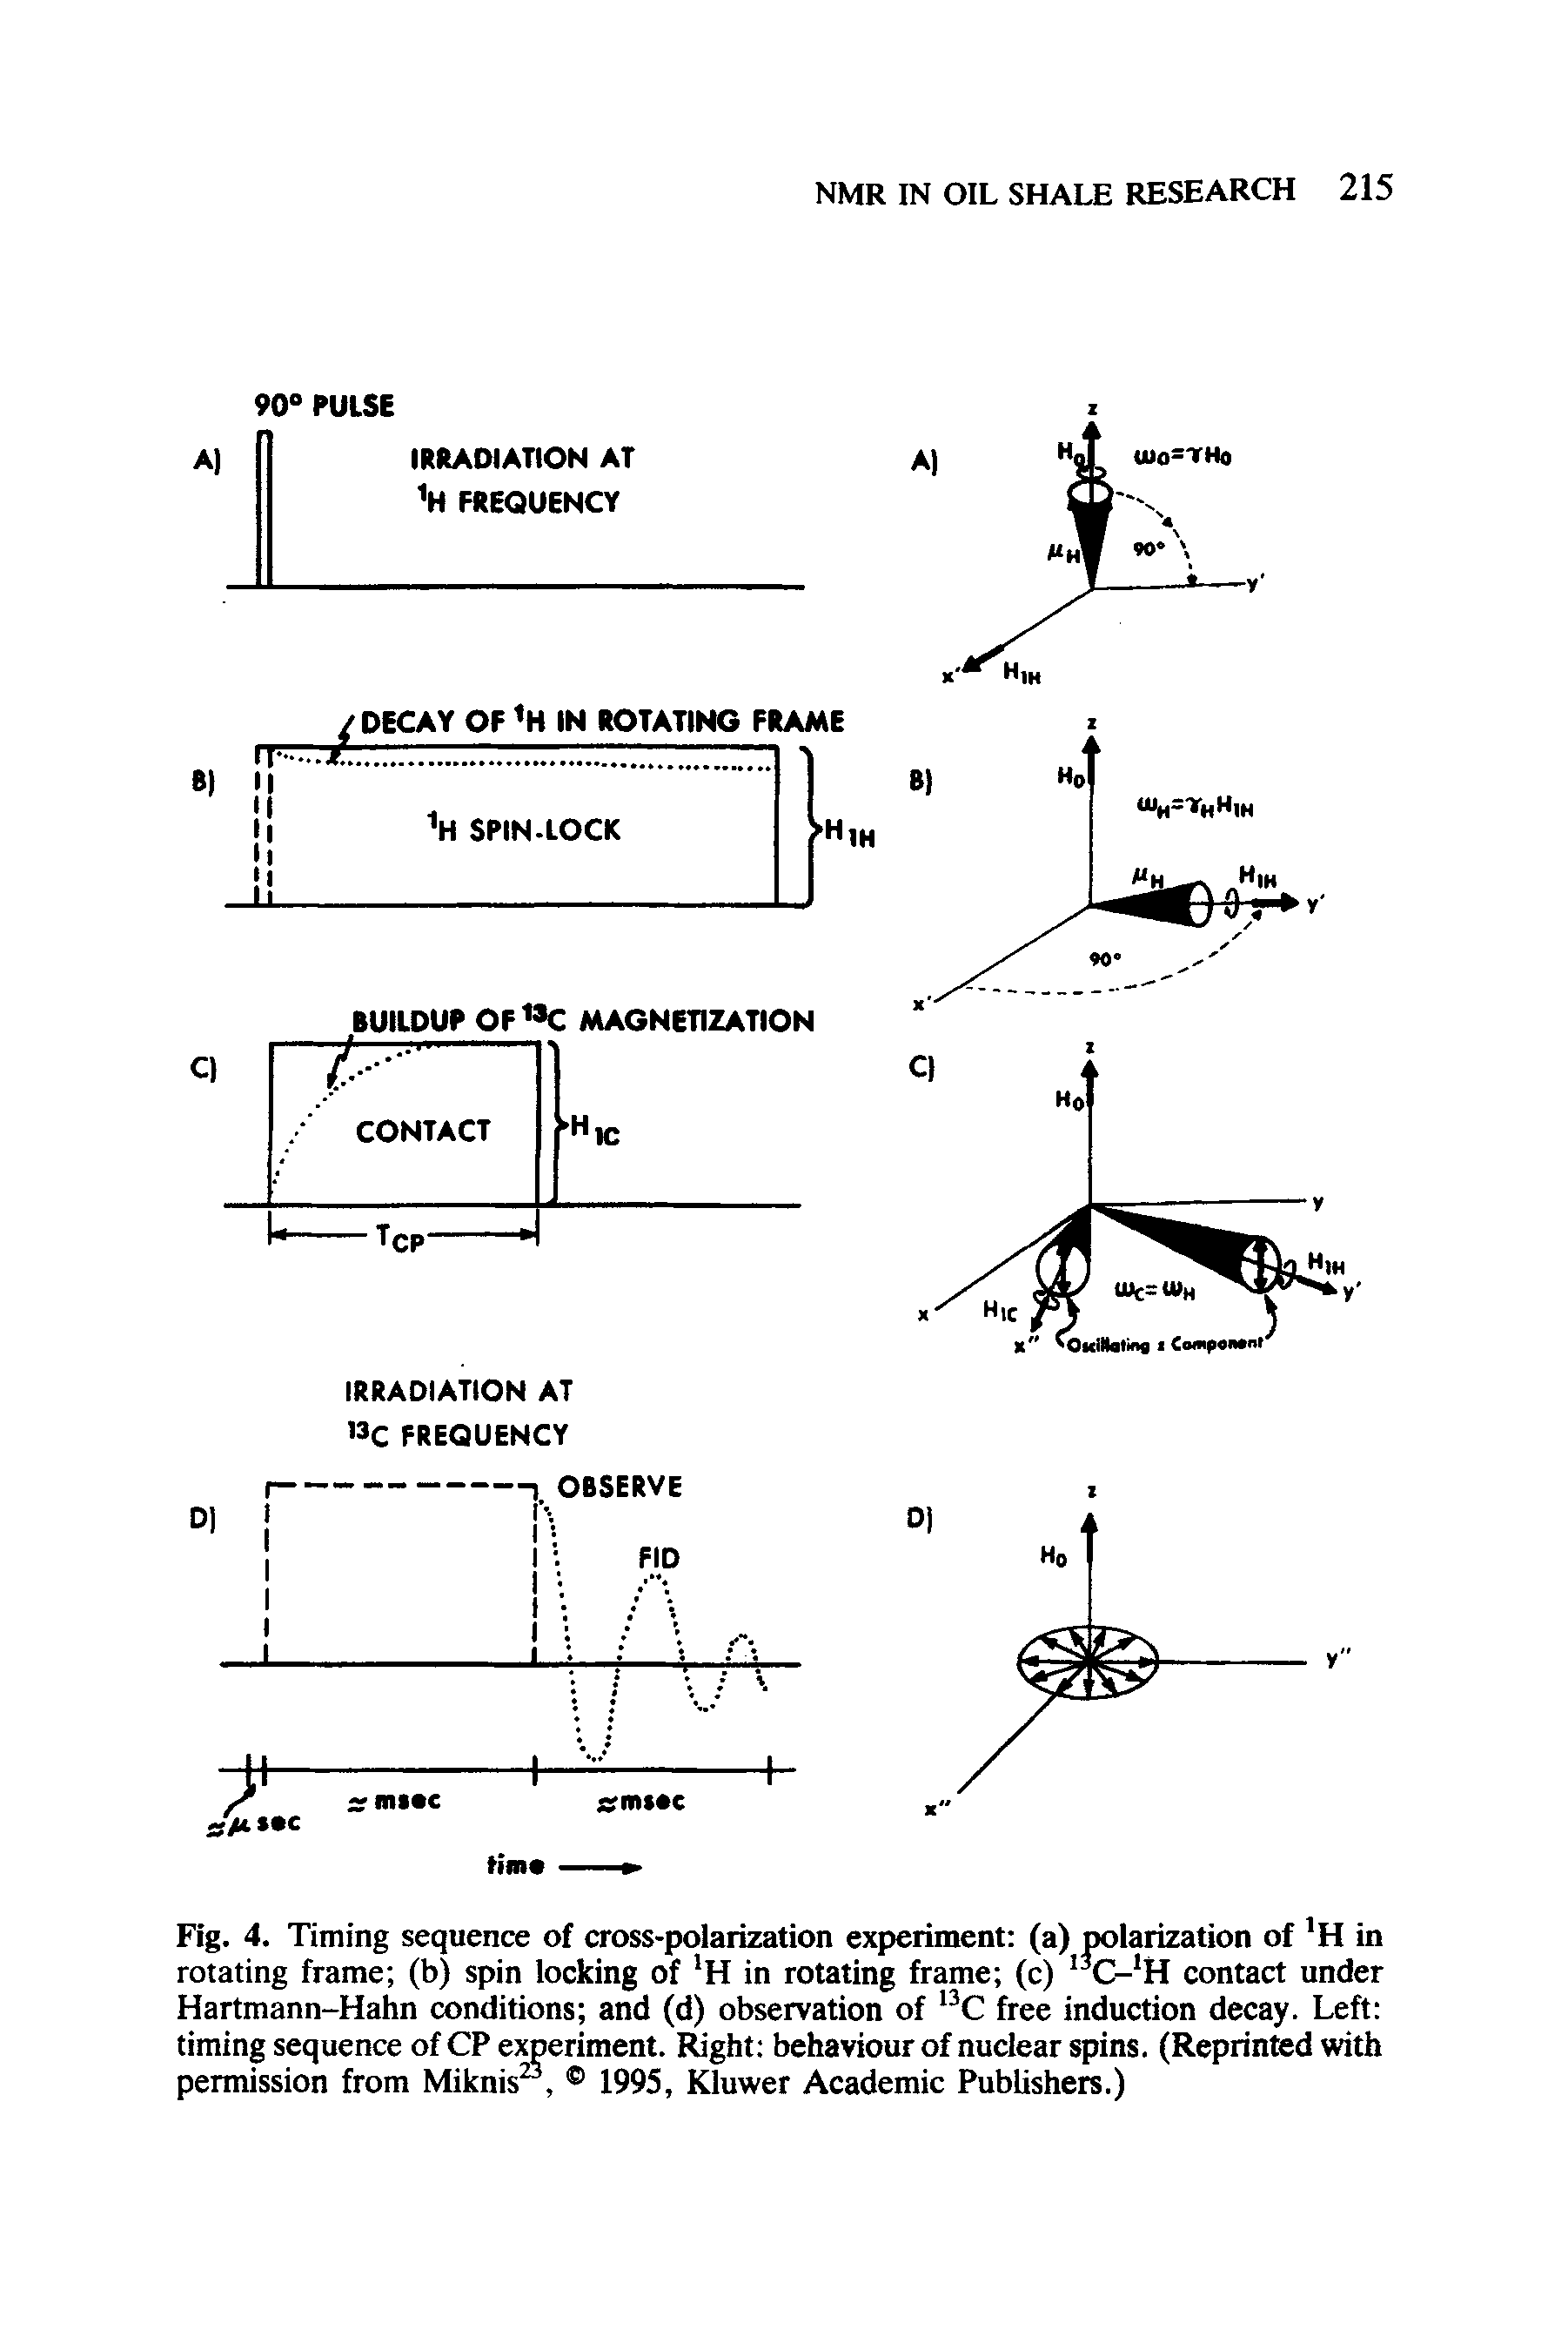 Fig. 4. Timing sequence of cross-polarization experiment (a) polarization of H in rotating frame (b) spin locking of in rotating frame (c) "C- H contact under Hartmann-Hahn conditions and (d) observation of free induction decay. Left timing sequence of CP experiment. Right behaviour of nuclear spins. (Reprinted with permission from Miknis , 1995, Kluwer Academic Publishers.)...